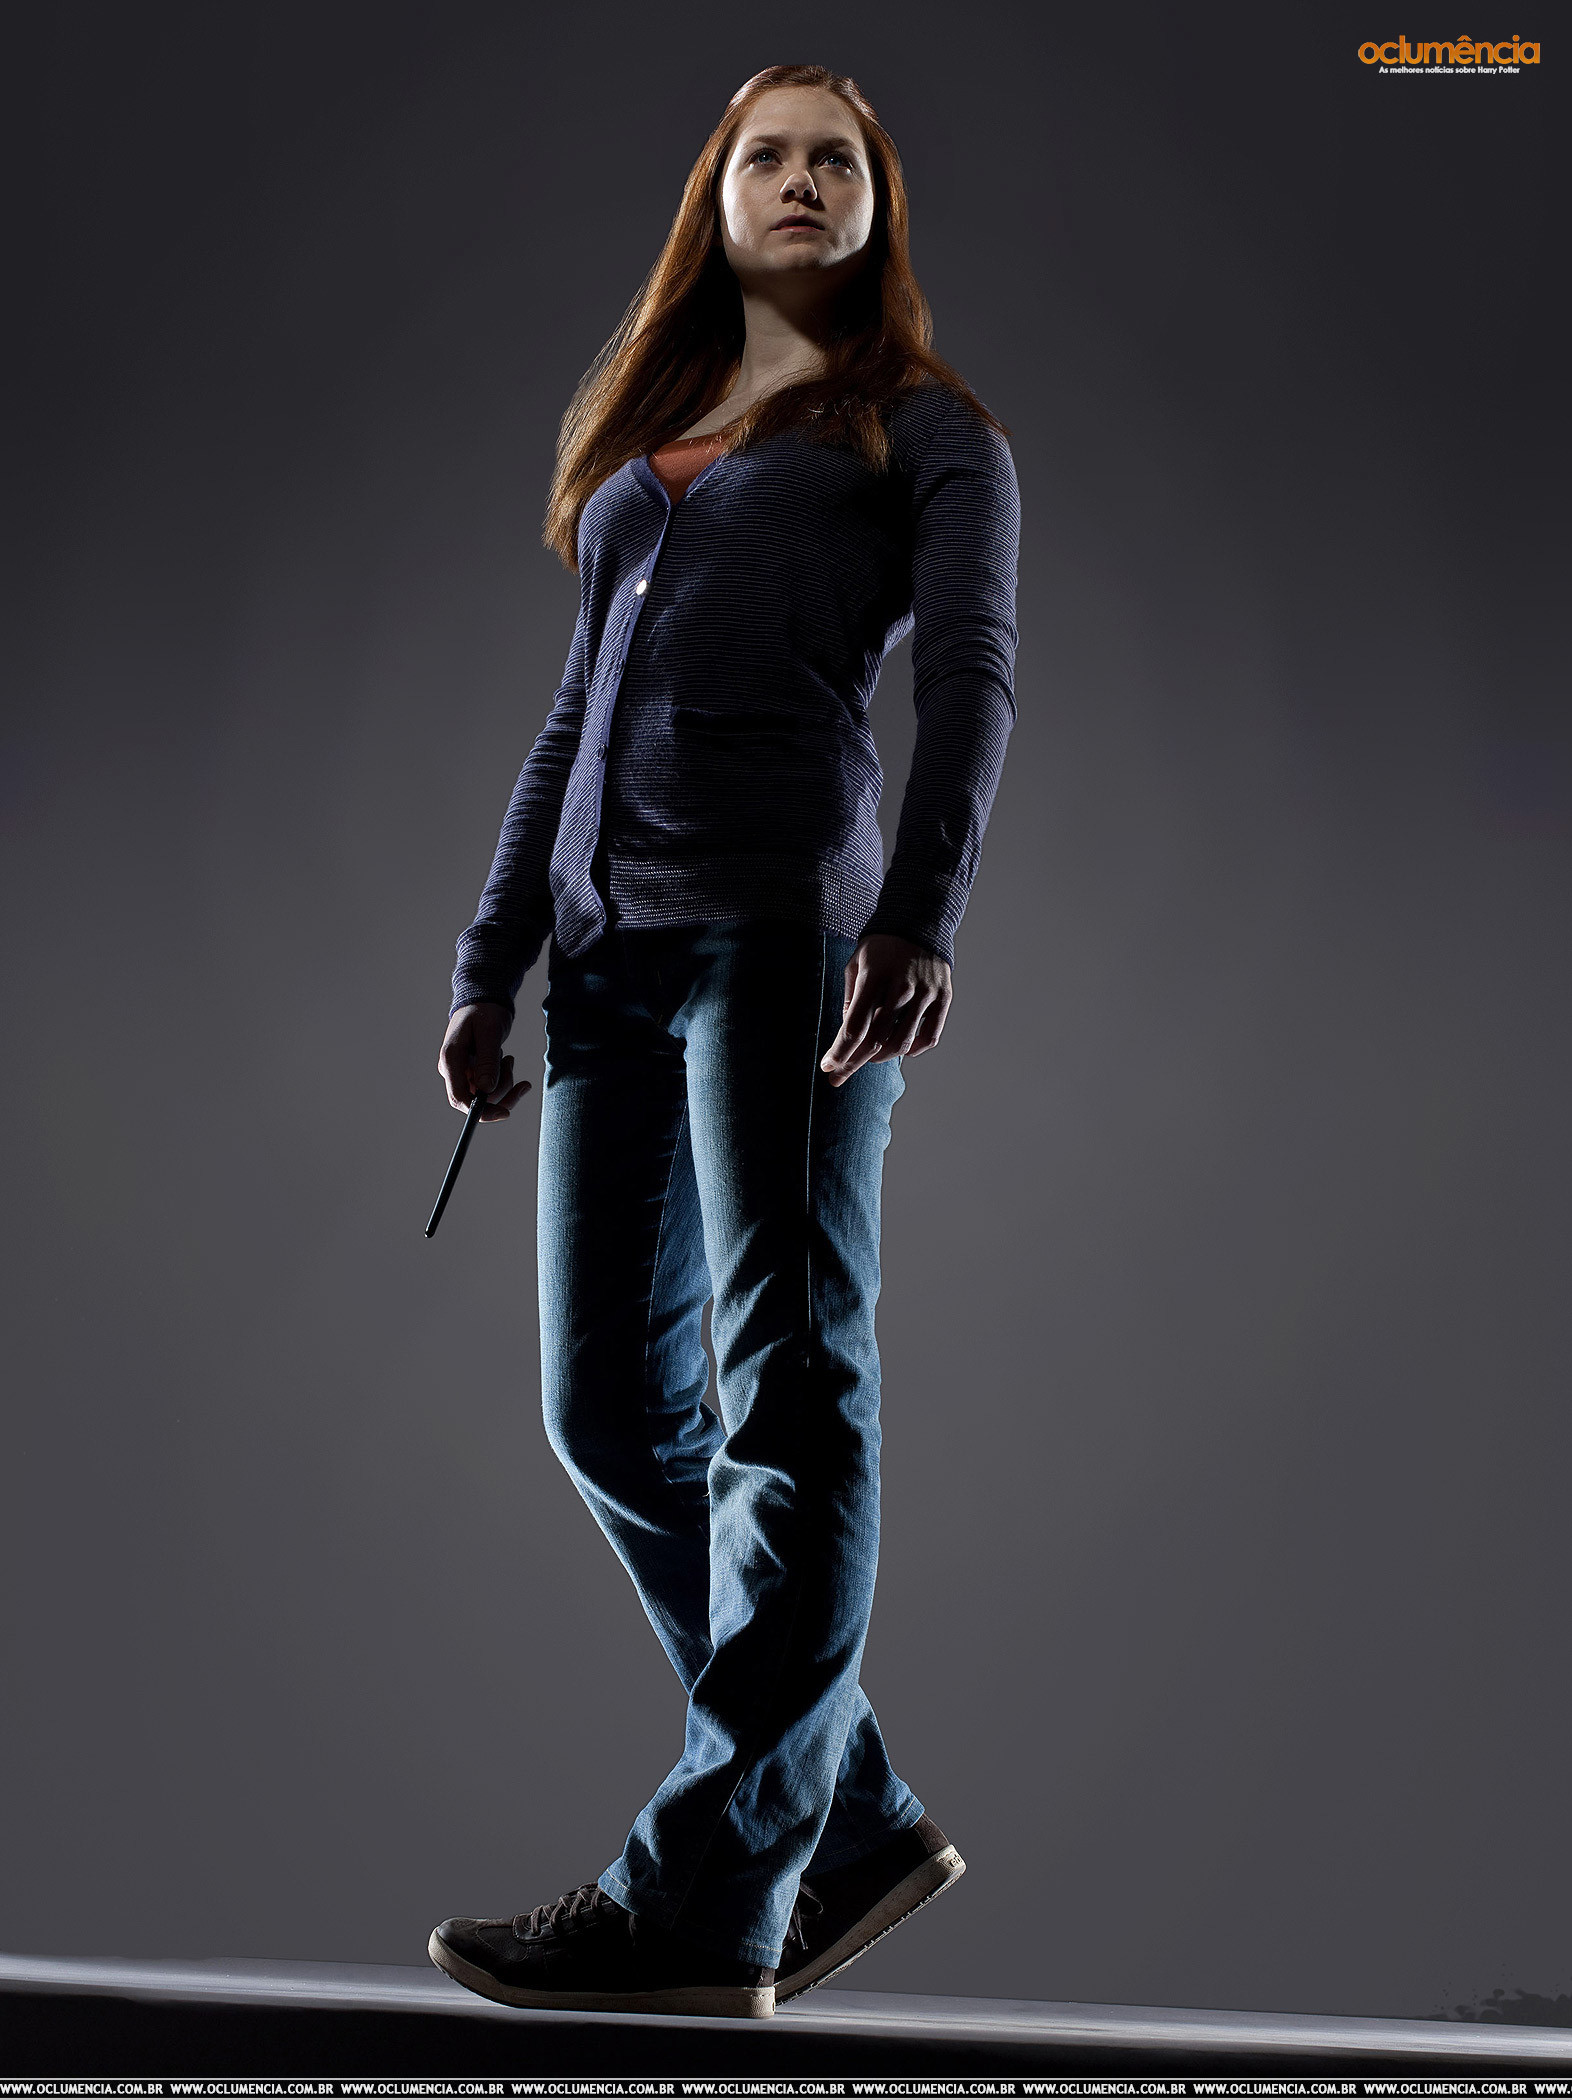 1572x2100 HD Wallpaper and background photos of DH Promo for fans of Ginevra "Ginny"  Weasley images.